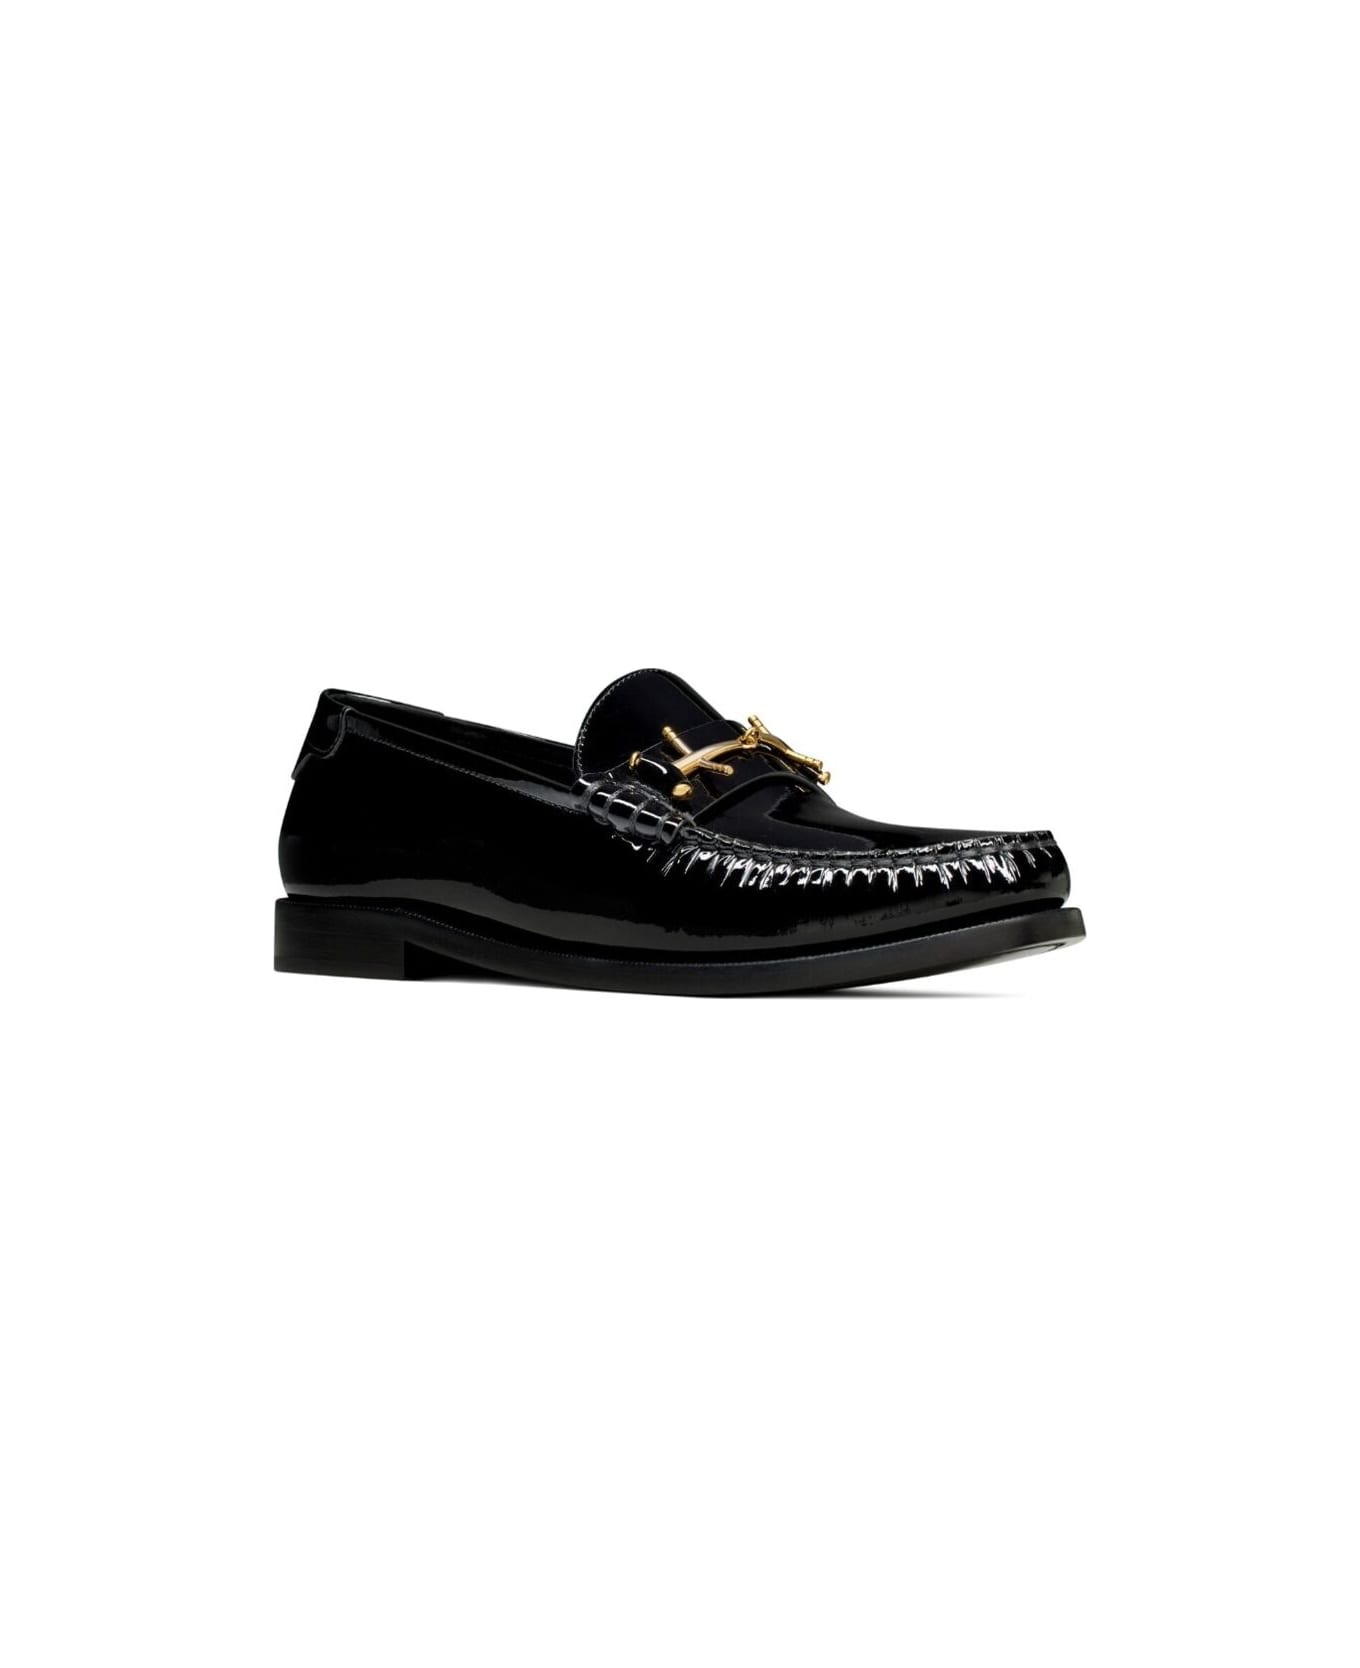 Saint Laurent Le Loafer Penny Slippers In Black Patent Leather Woman - Black